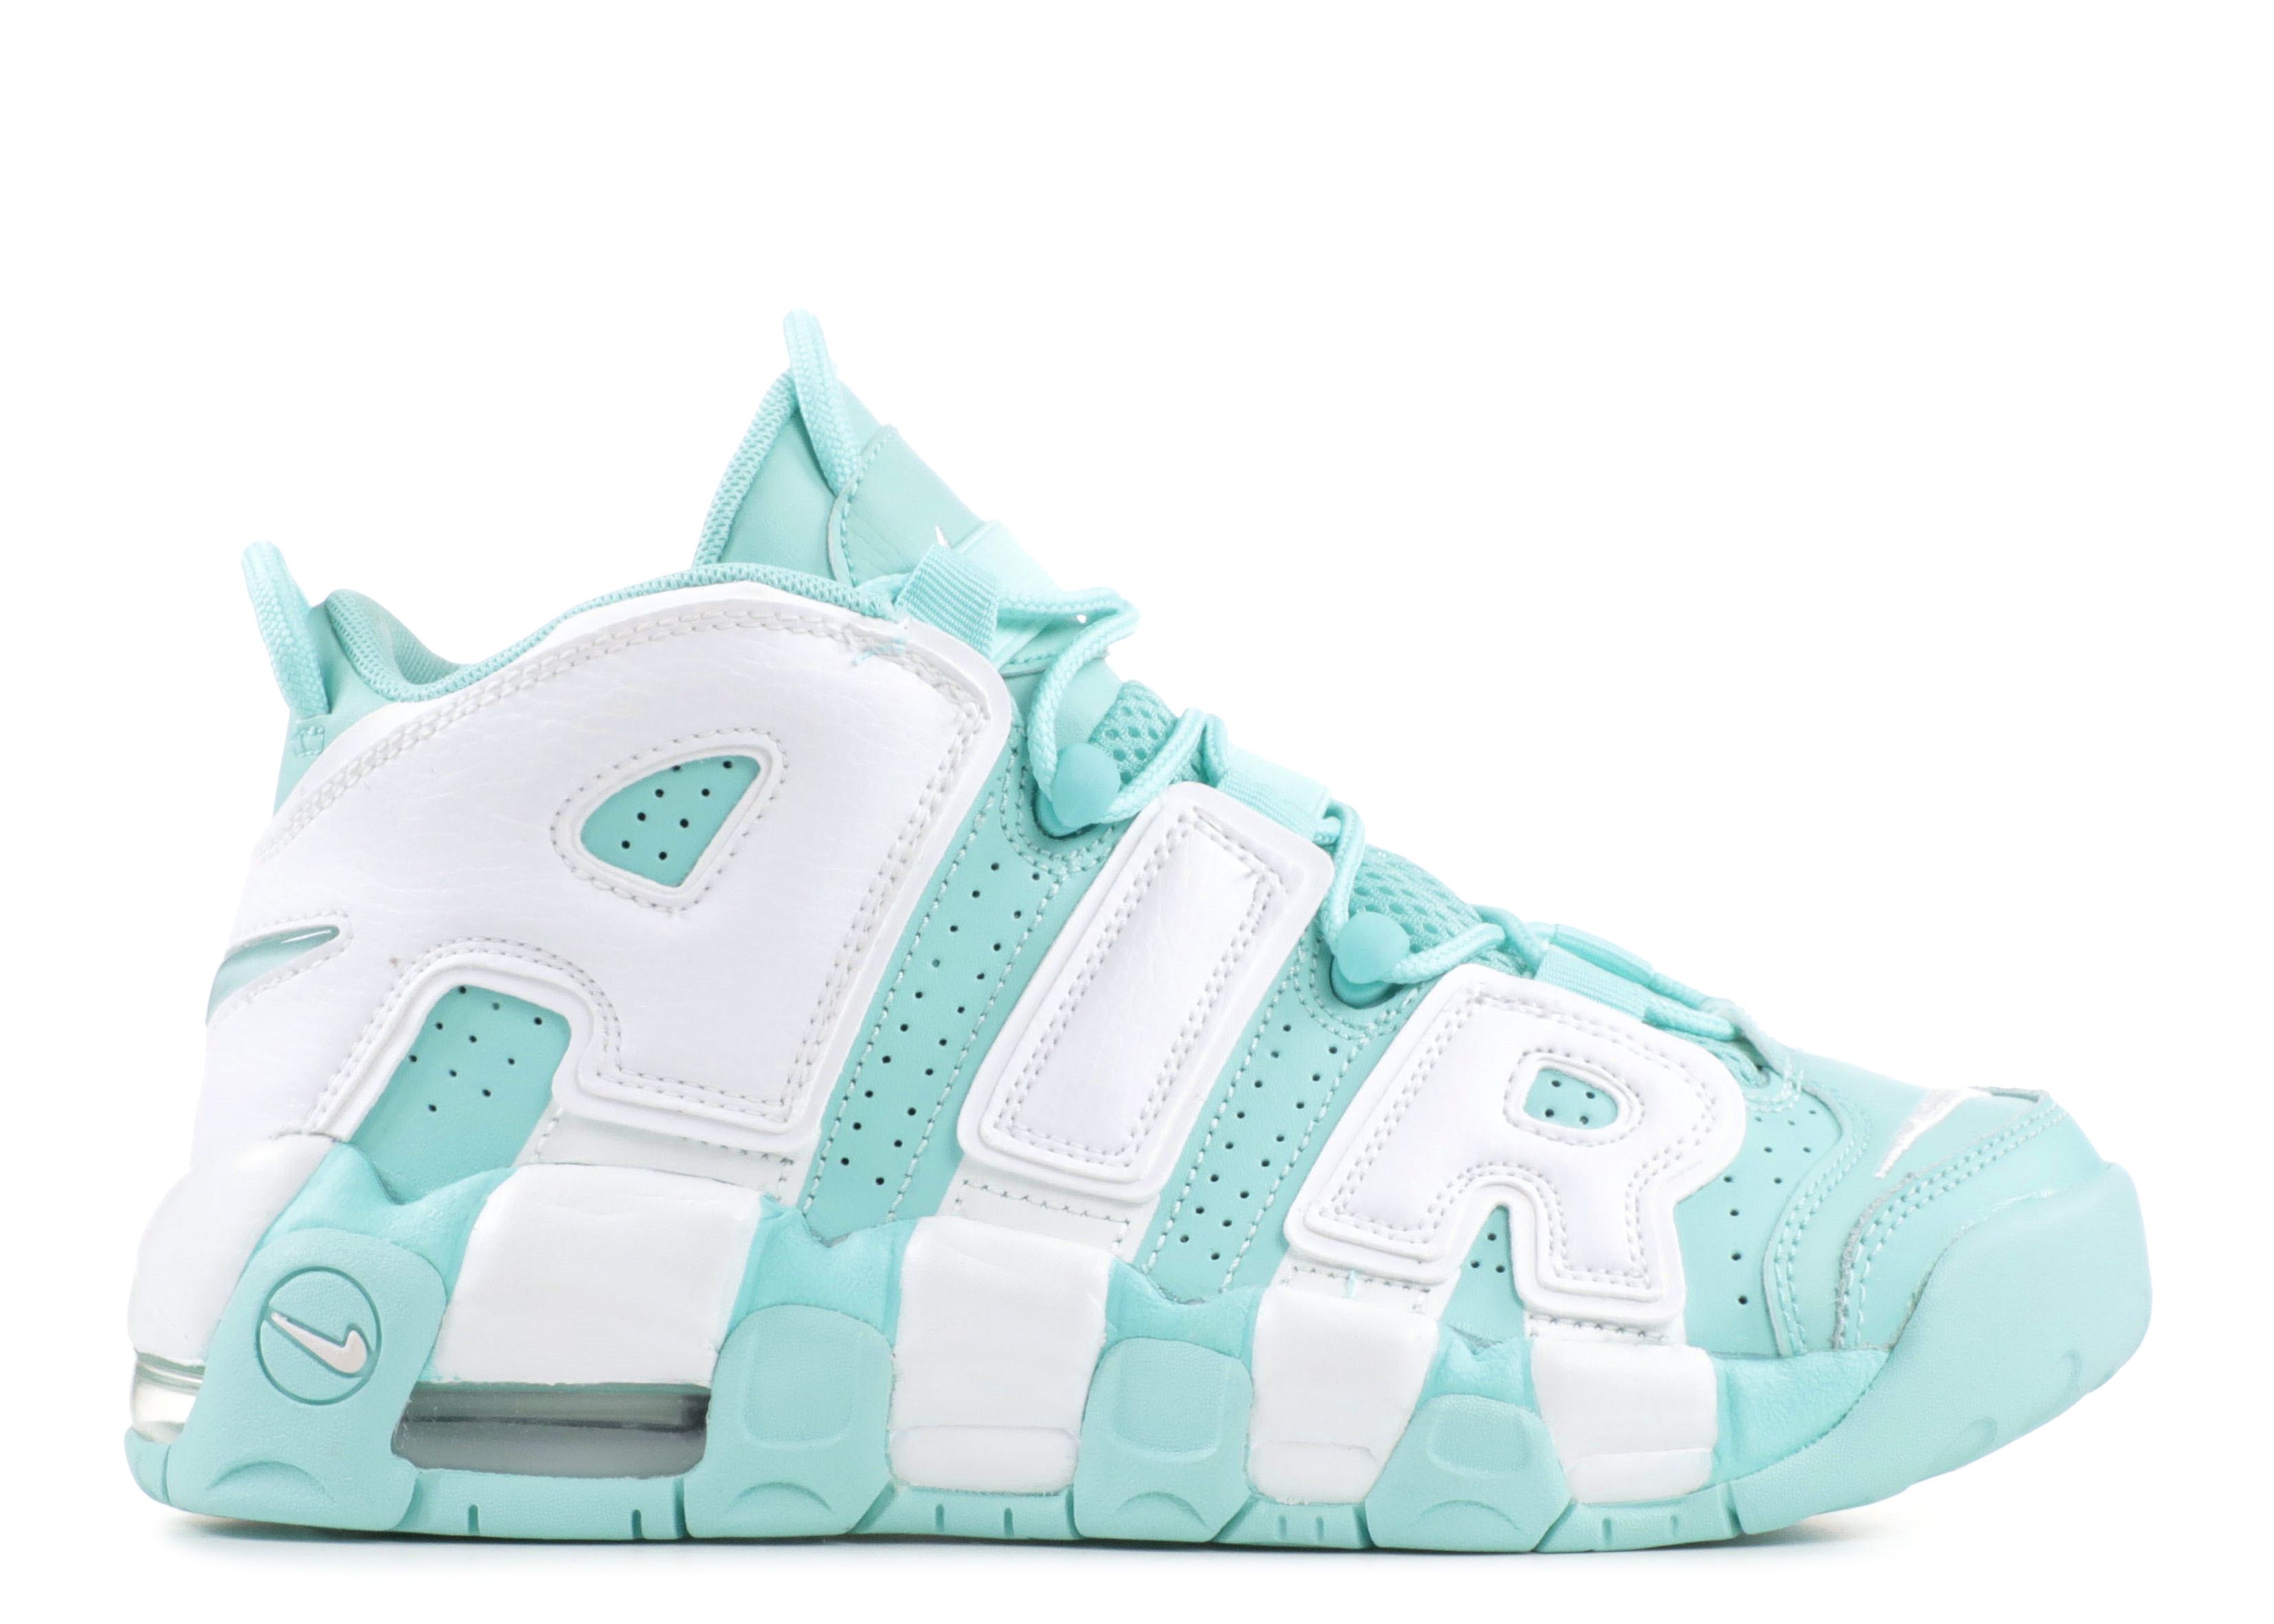 nike air more uptempo teal